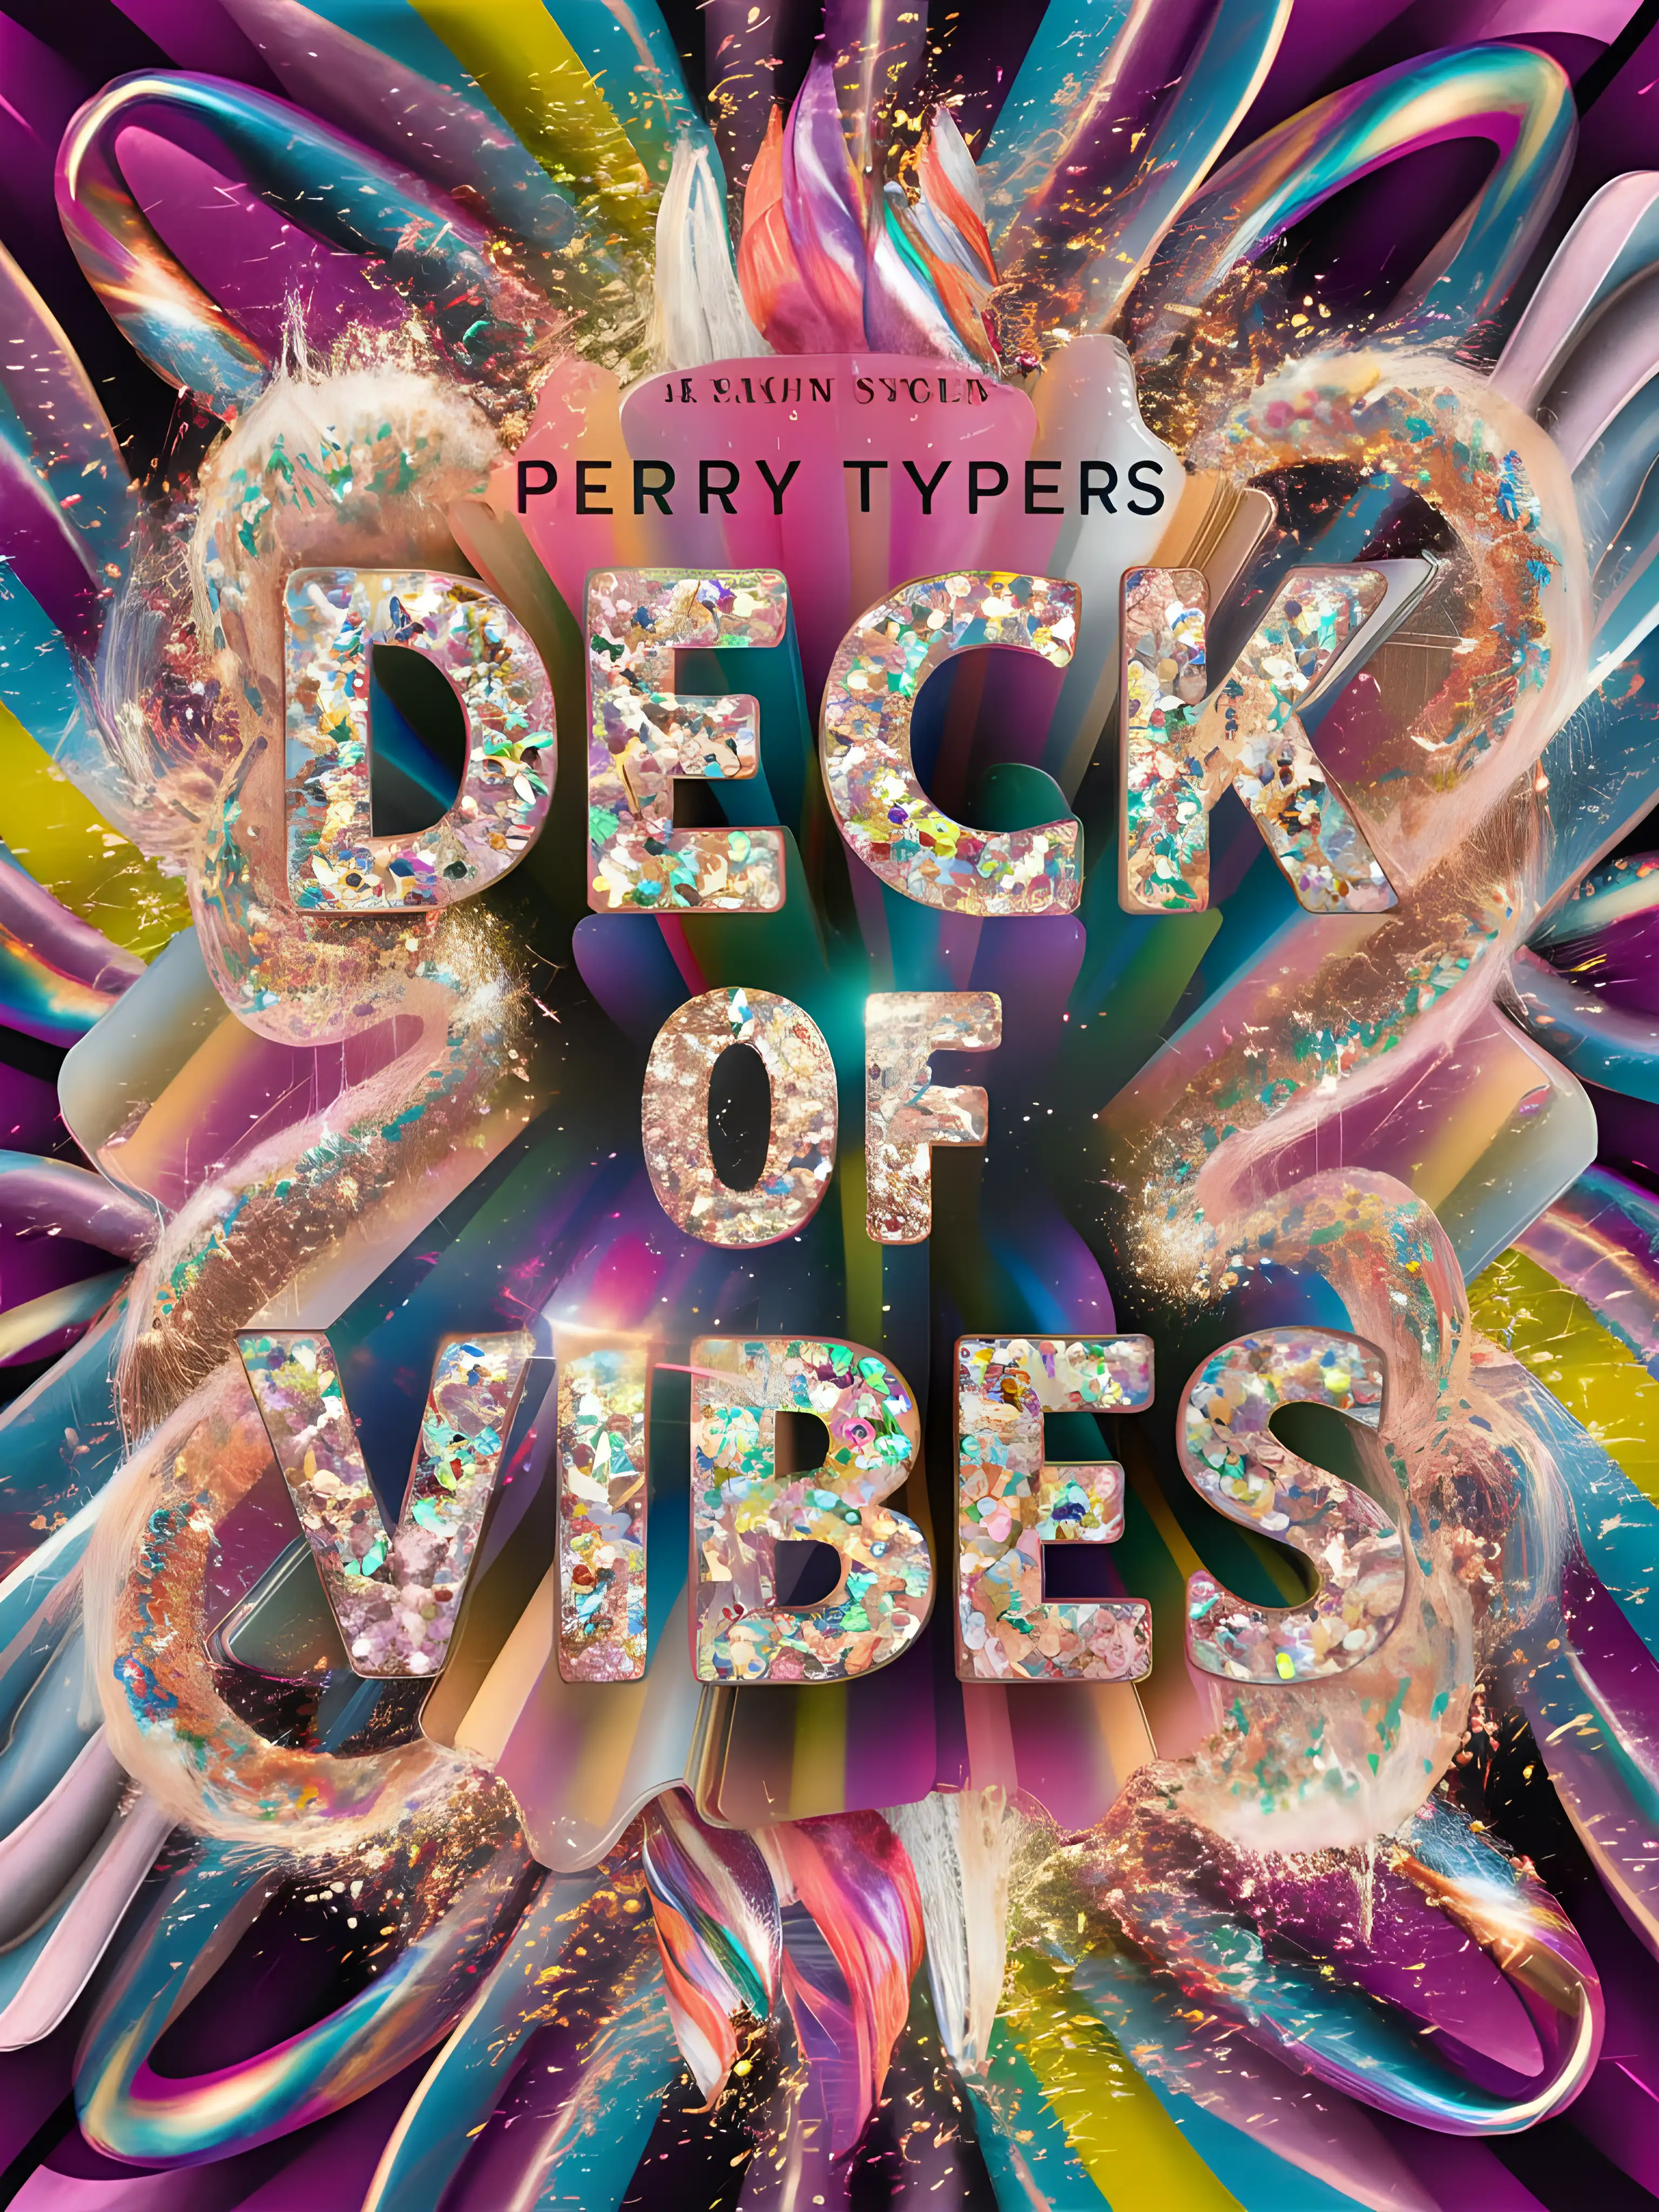 A Majestic, candy like cover of Rainbow Glitter and iridescent powder swirling into the title "Perry Typer's DECK OF VIBES"